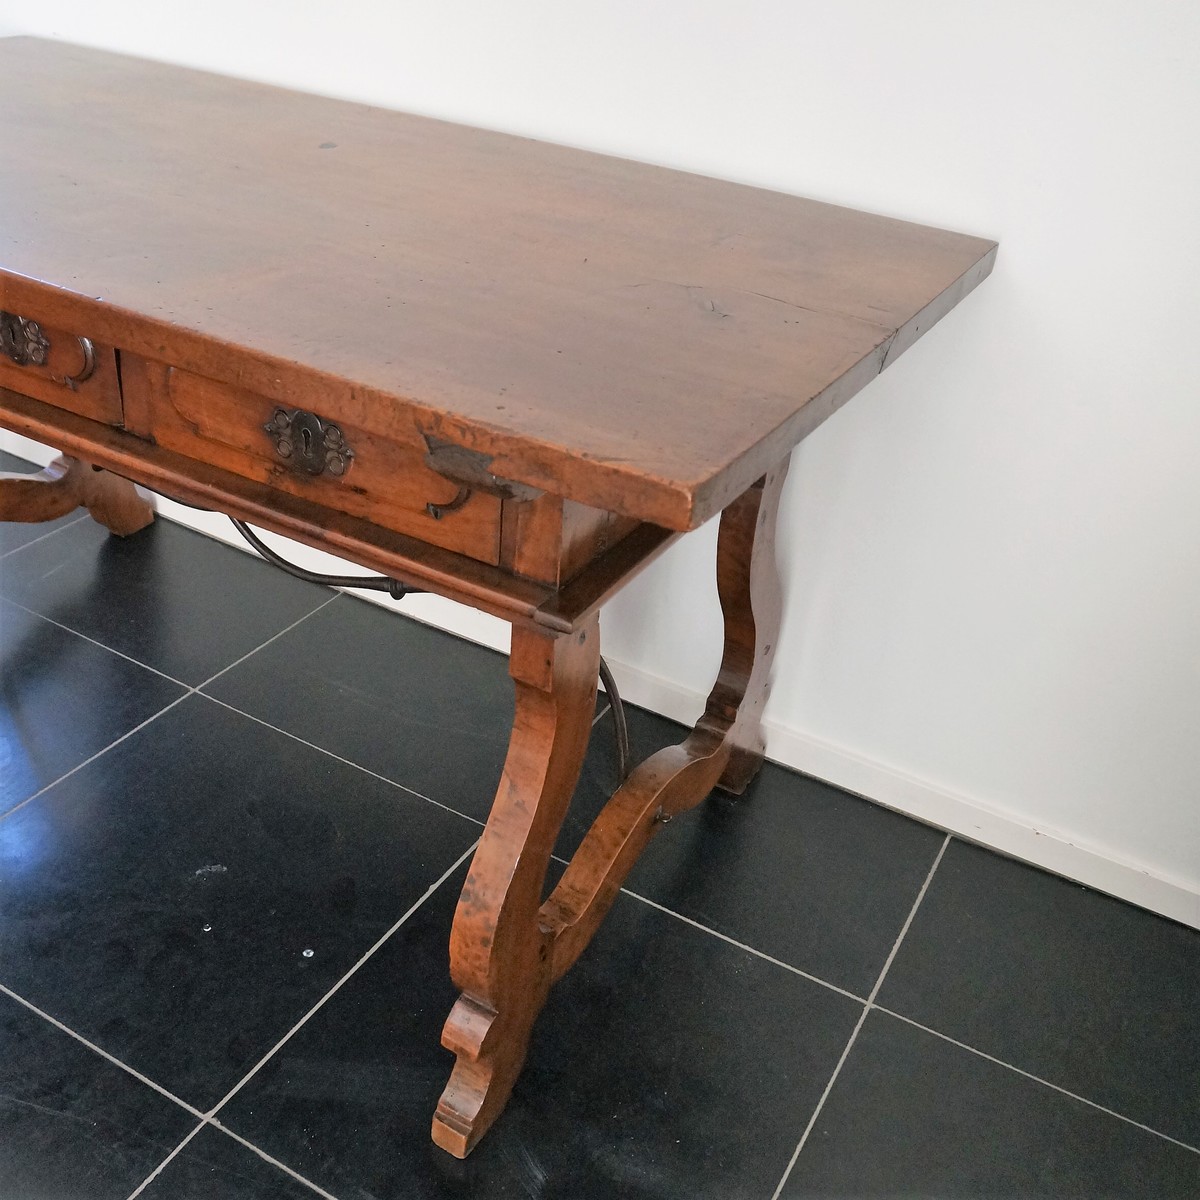 17th century style Spanish Walnut Table With 3 Drawers